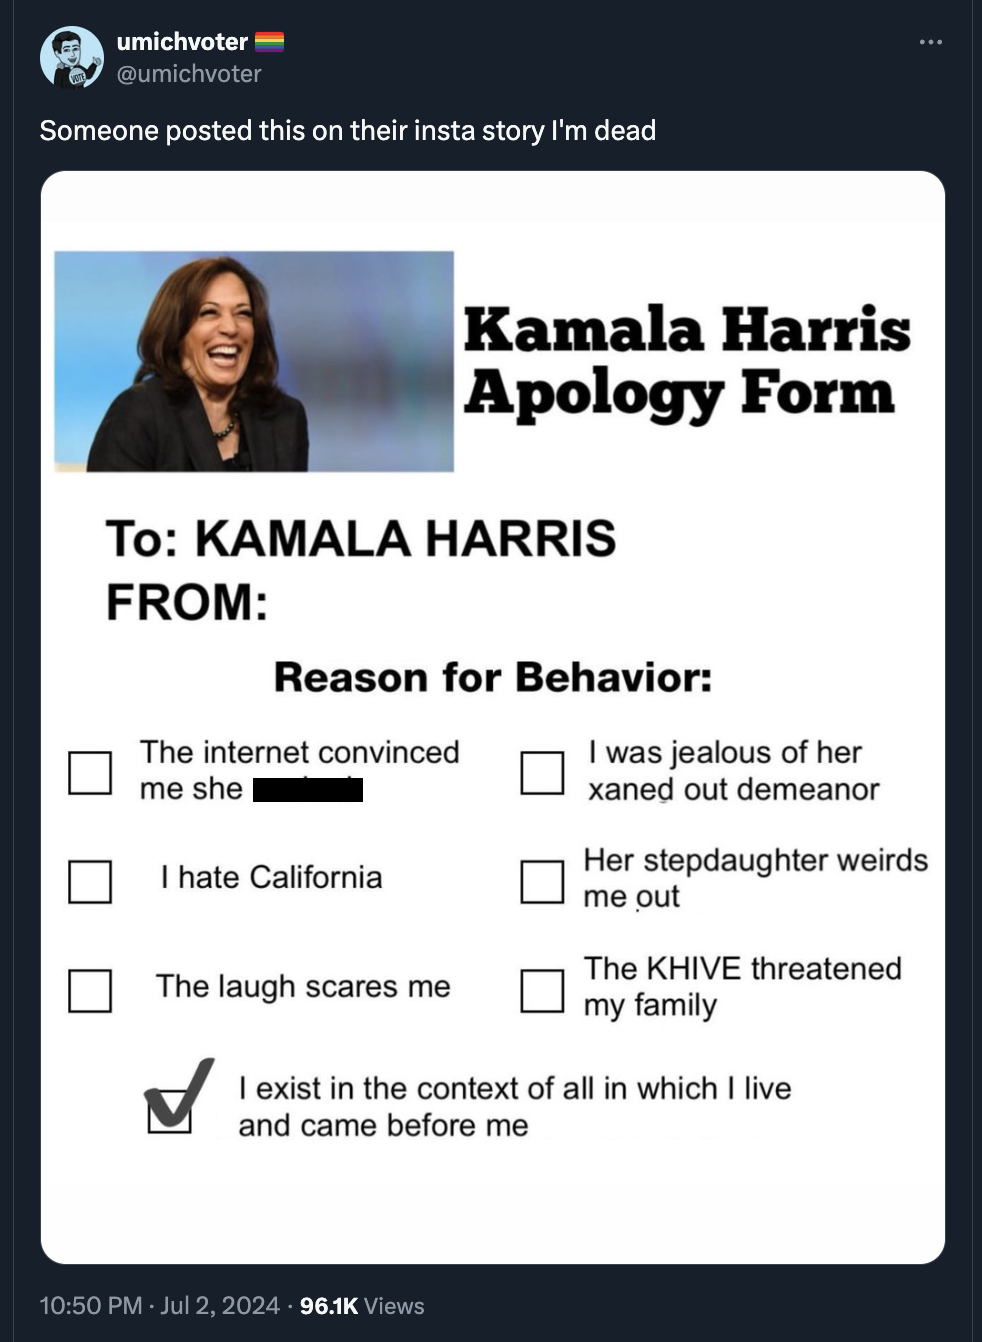 screenshot - umichvoter Someone posted this on their insta story I'm dead Kamala Harris Apology Form To Kamala Harris From Reason for Behavior The internet convinced me she I hate California I was jealous of her xaned out demeanor Her stepdaughter weirds 